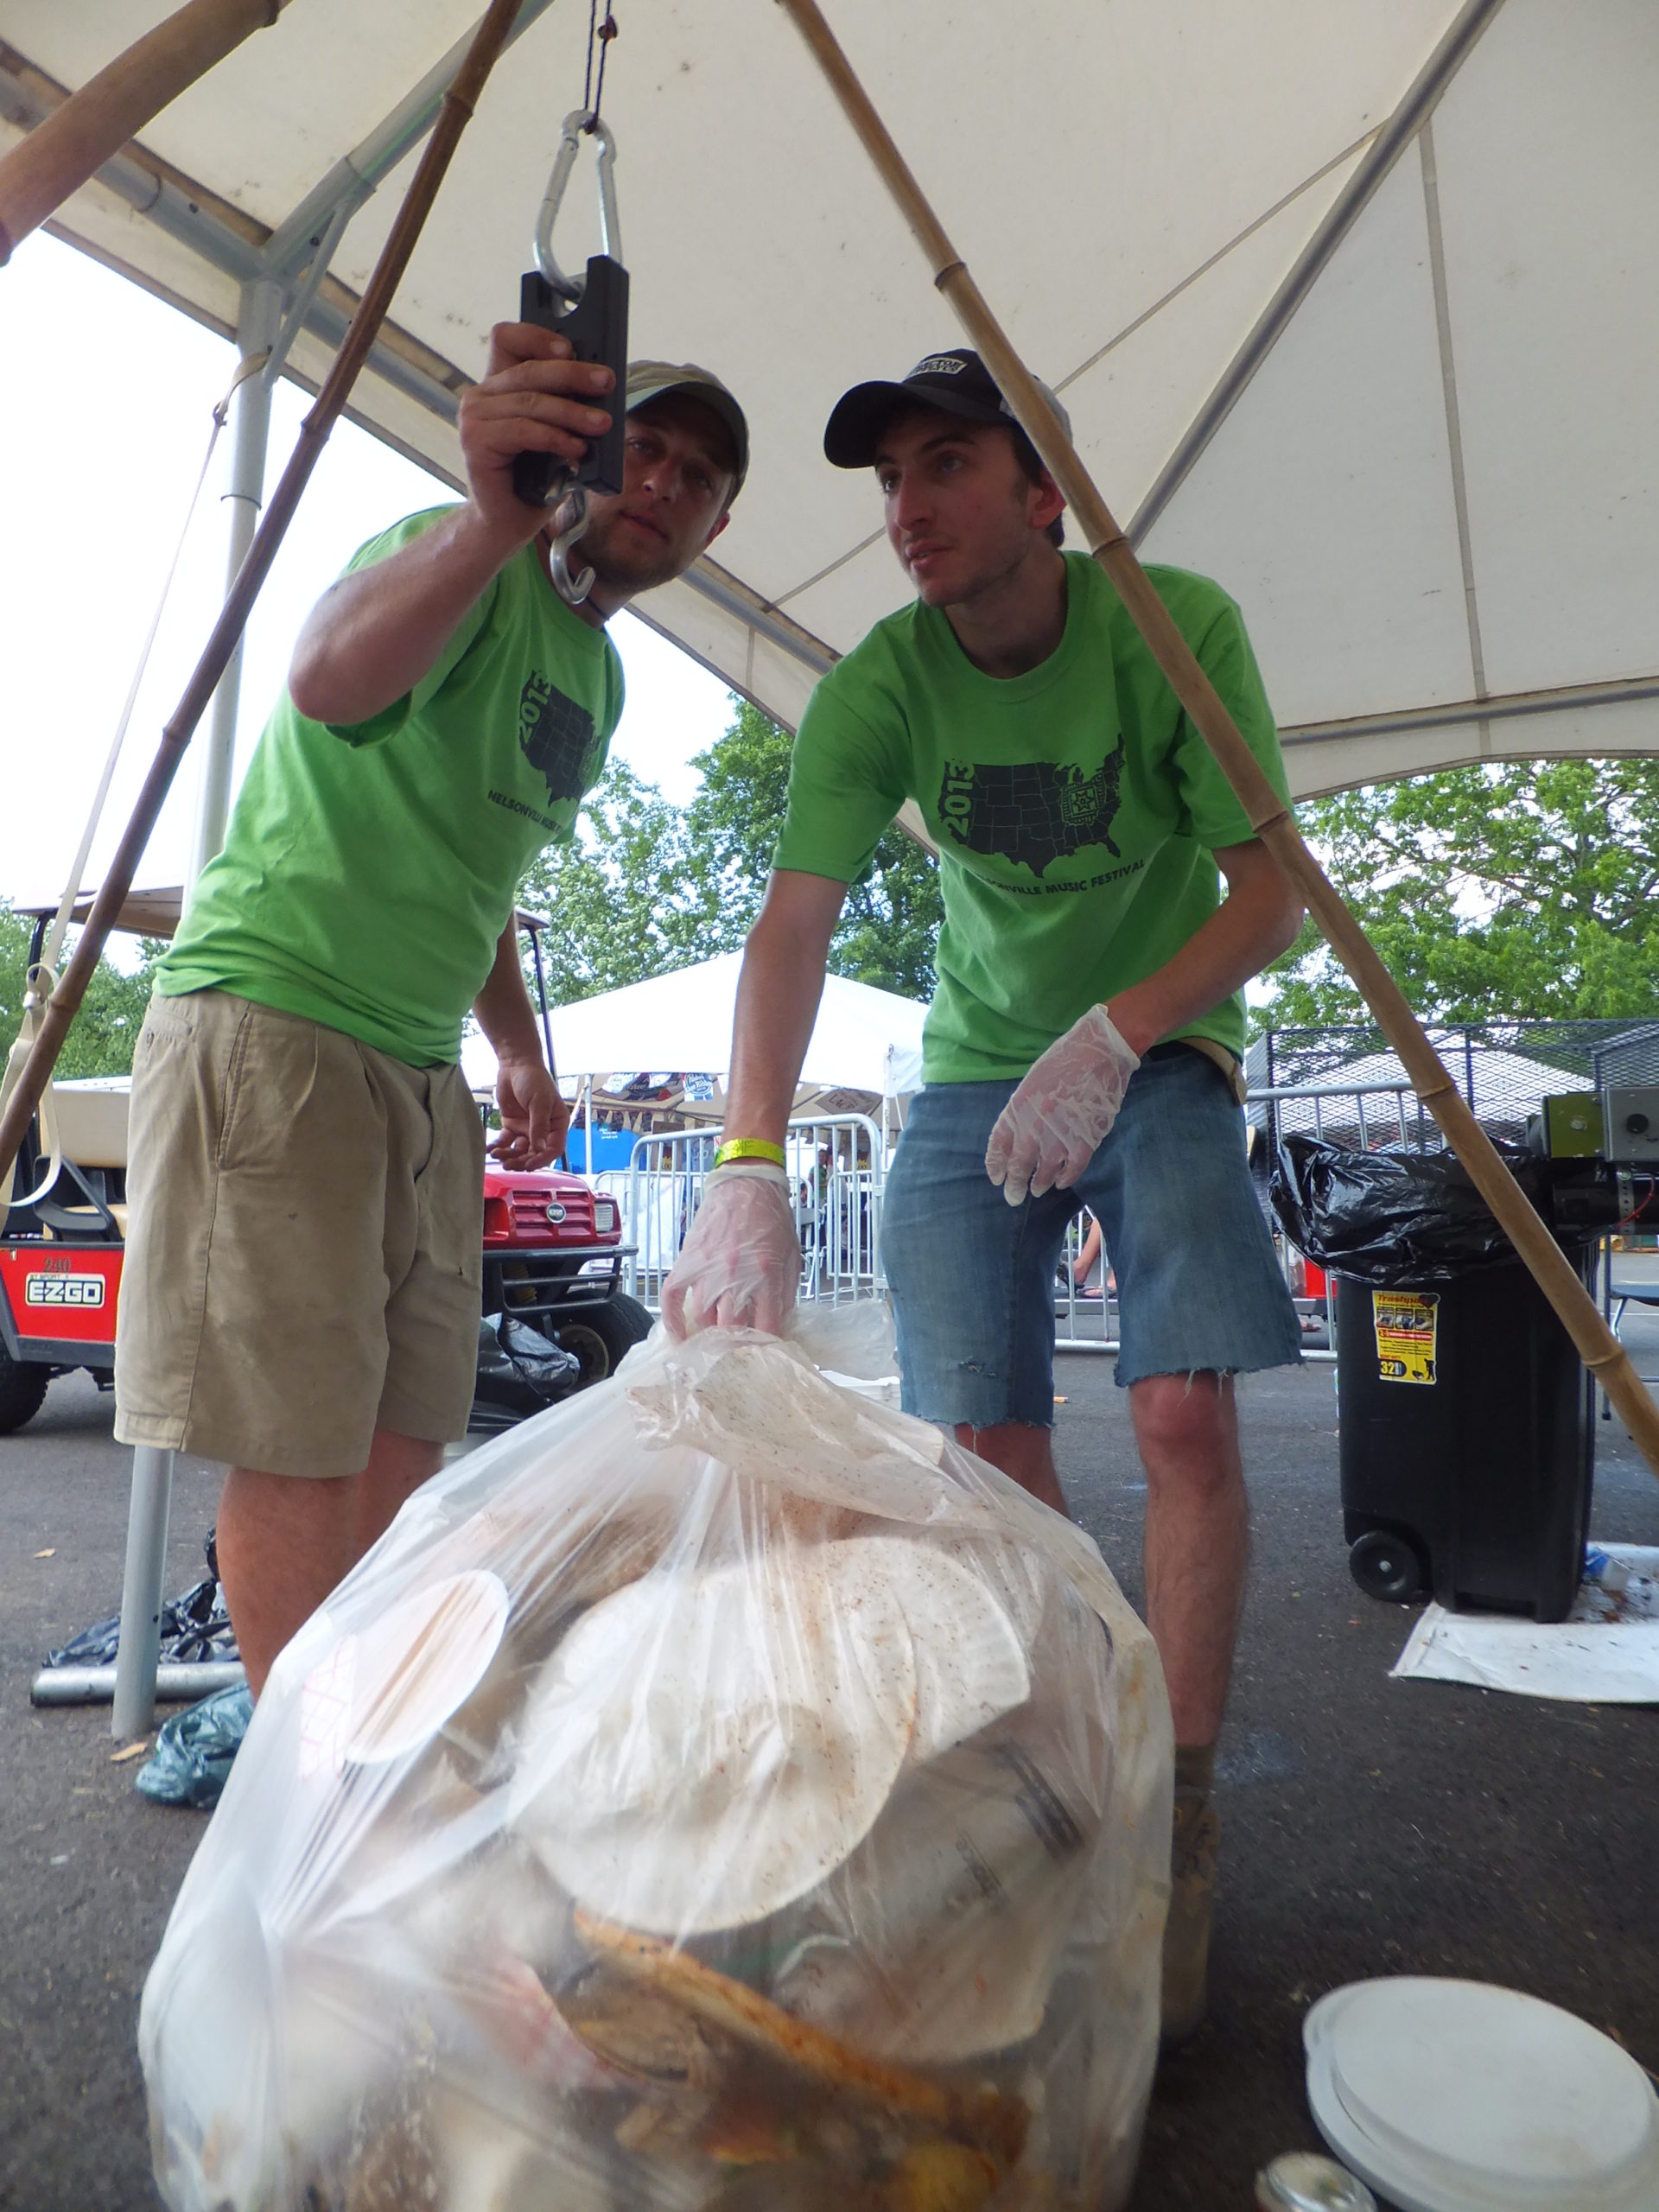 A staffer teaches a volunteer how to weight compostable materials at Nelsonville Music Festival, 2014.